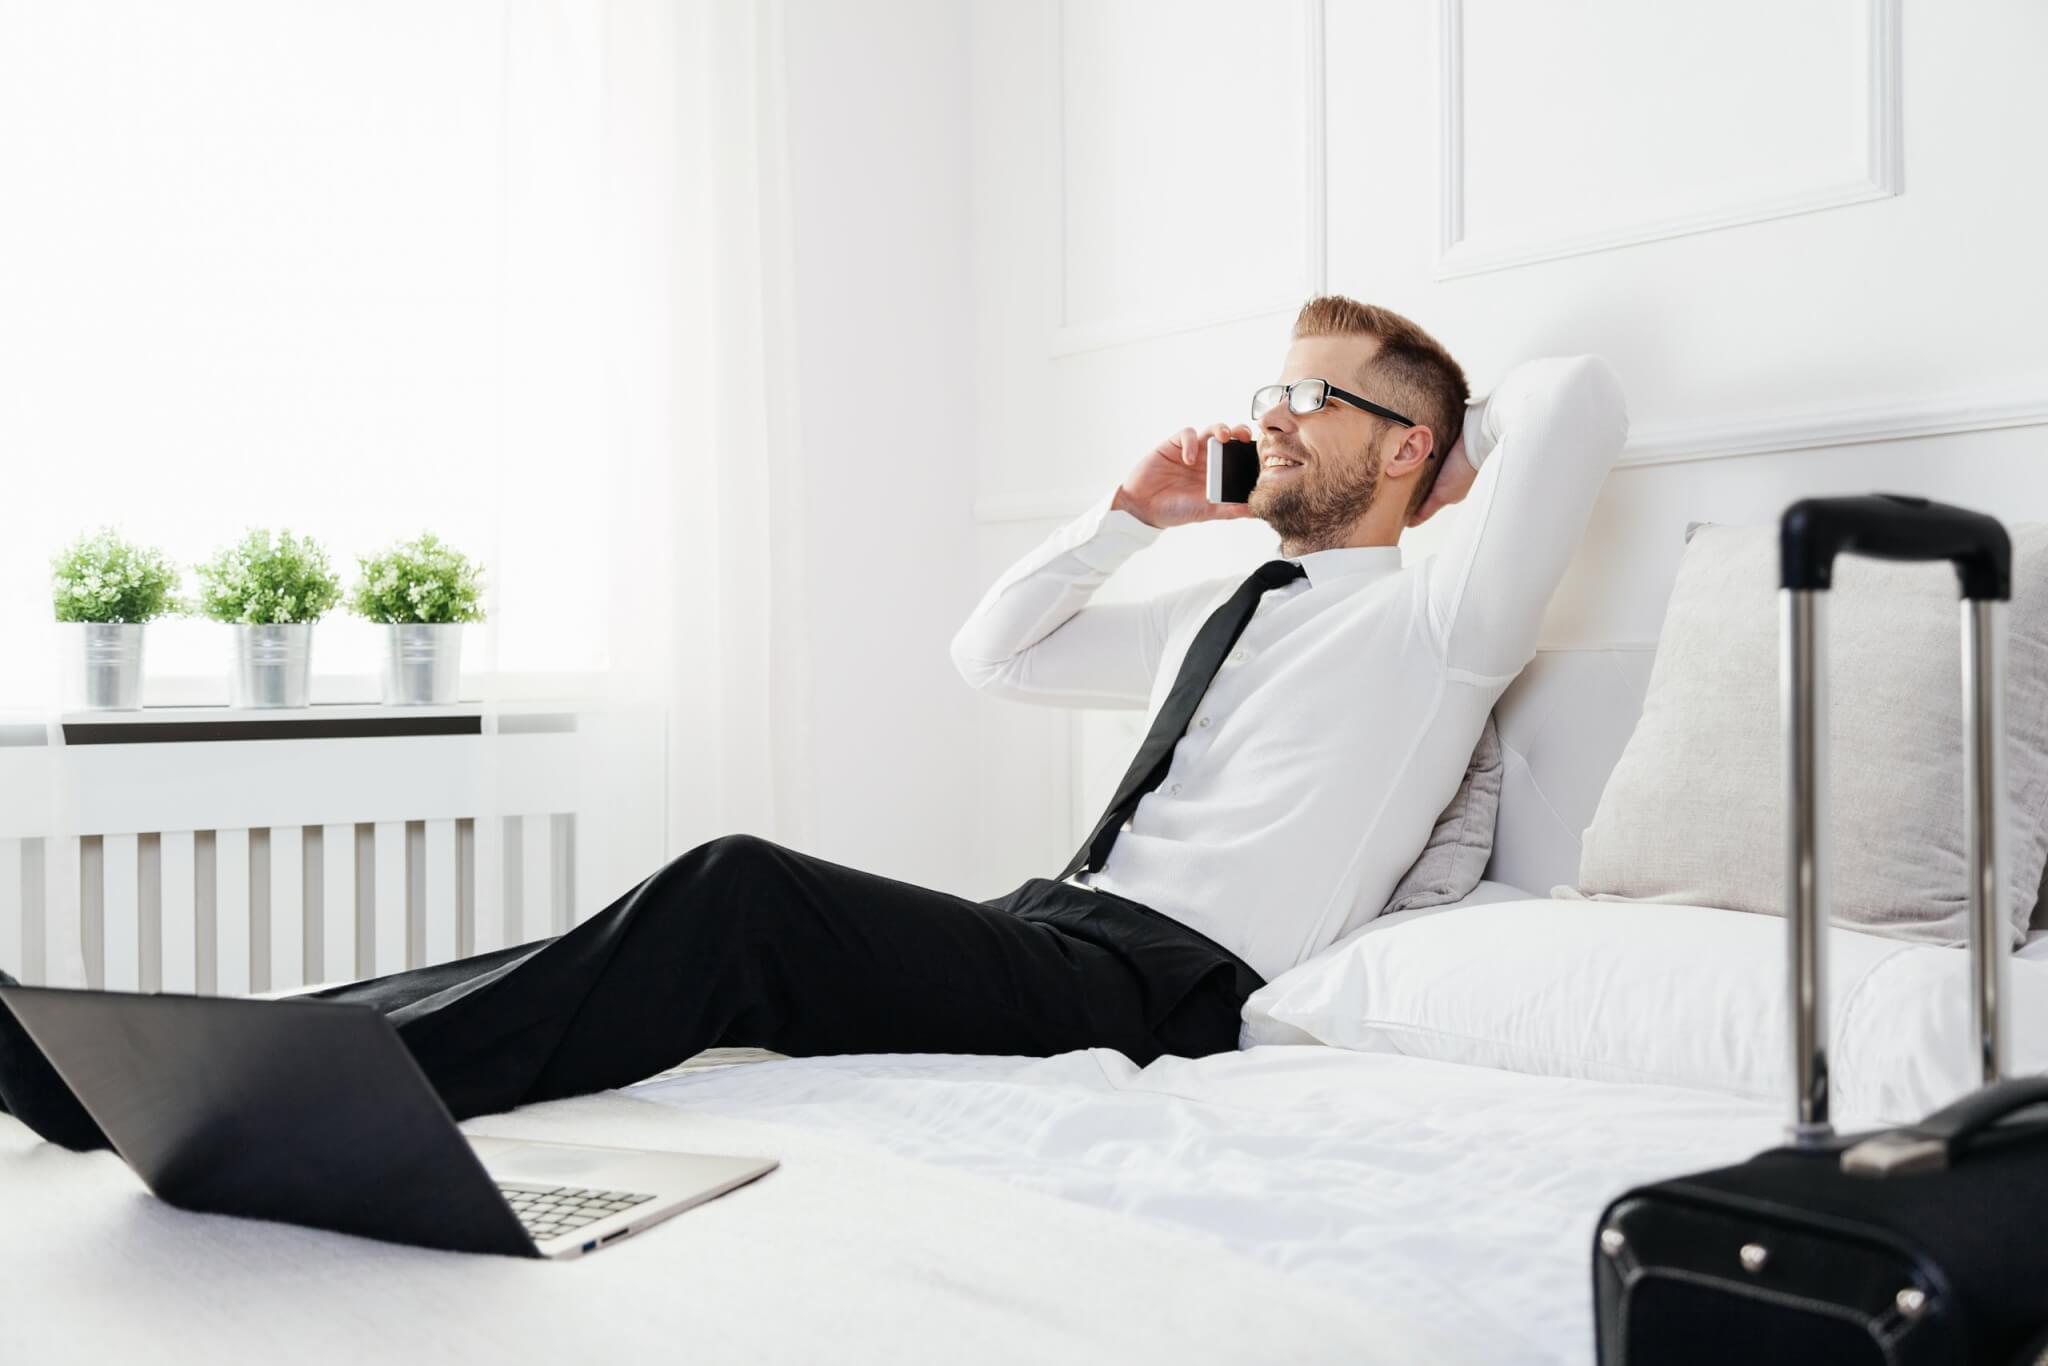 Make sure your short-term rentals appeal to business travellers